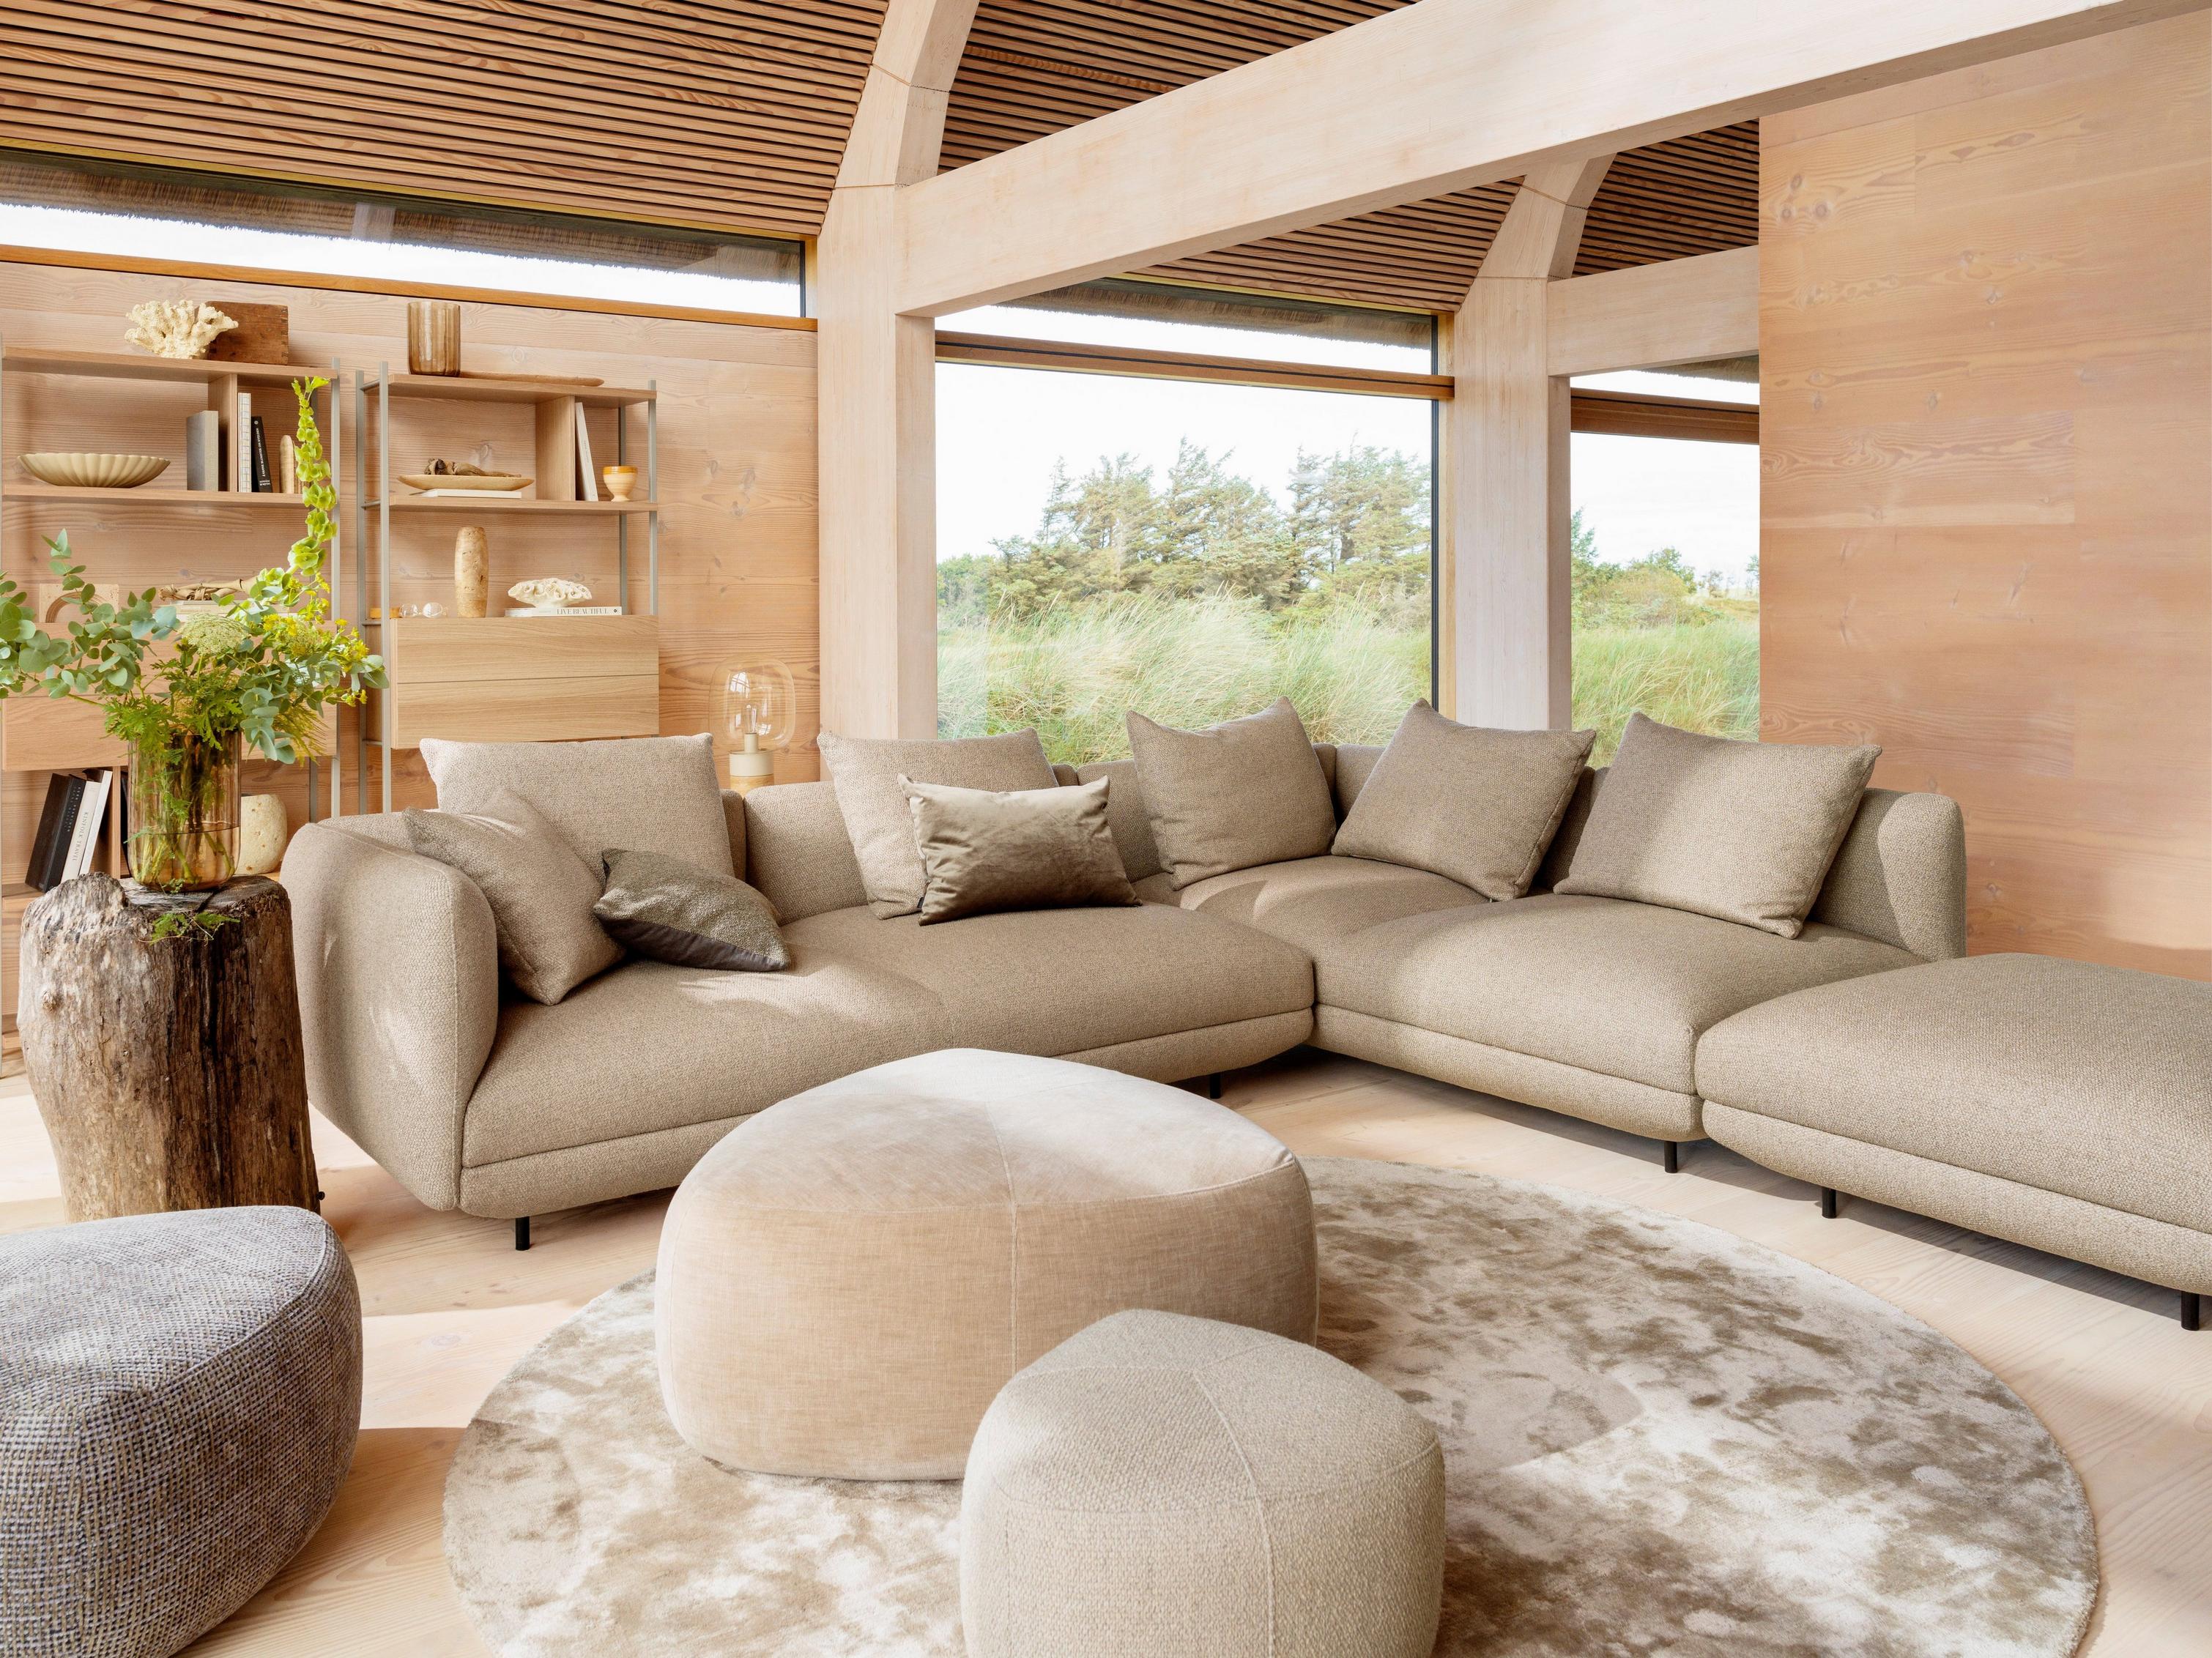 Warm, cozy living space featuring the Salamanca sofa upholstered in brown Lazio fabric.